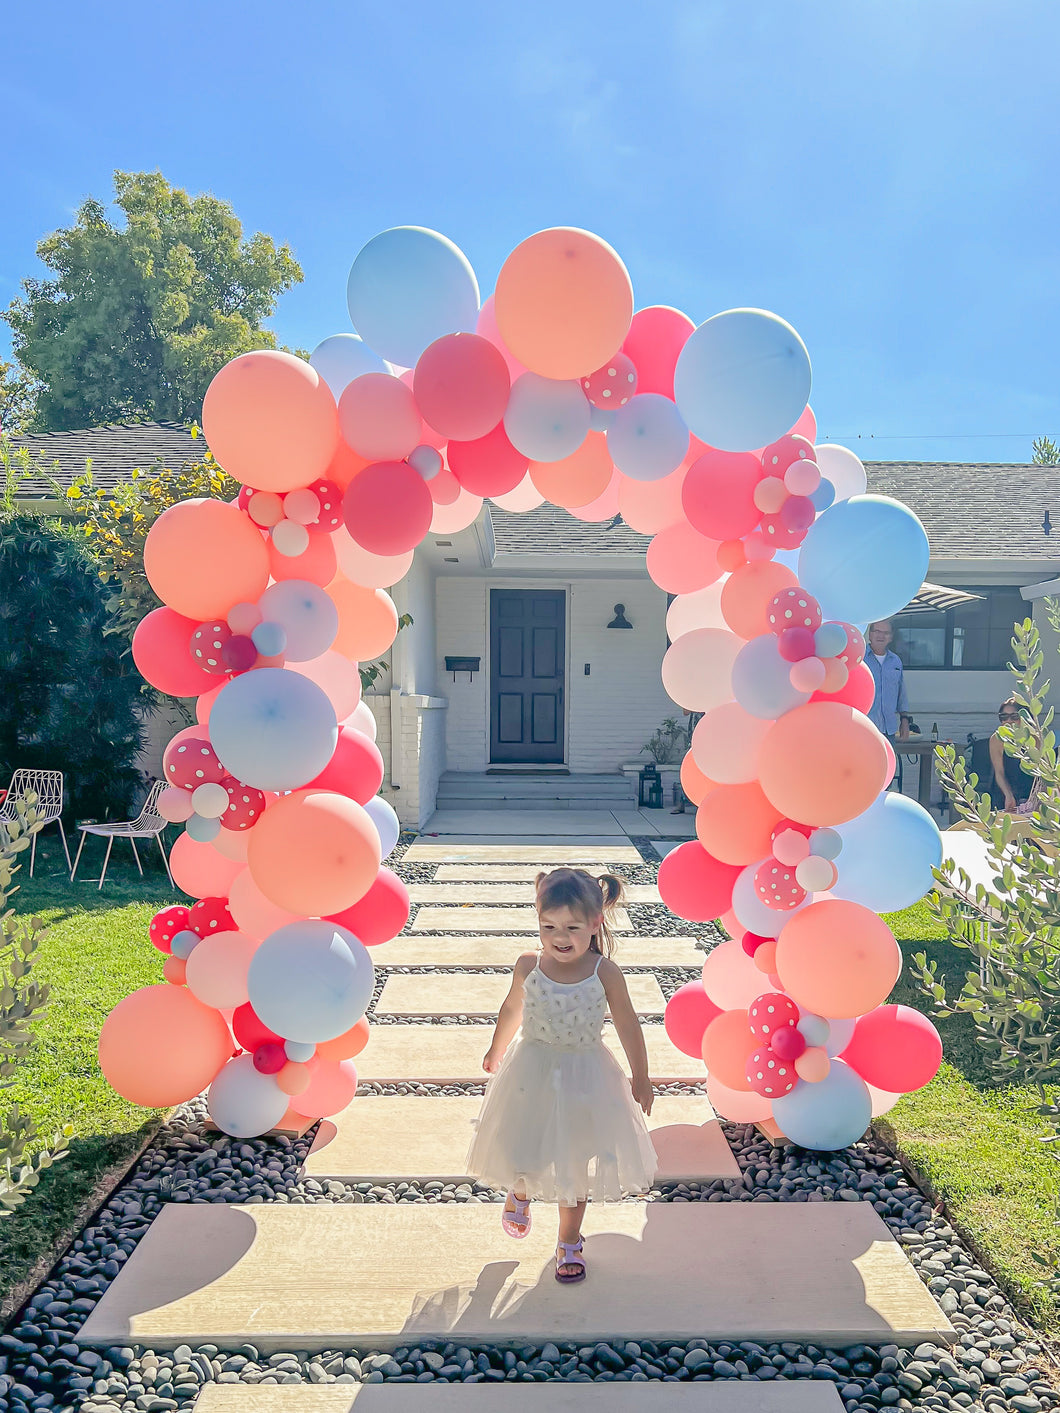 Balloon Arch To-Go: Pick Your Own Colors